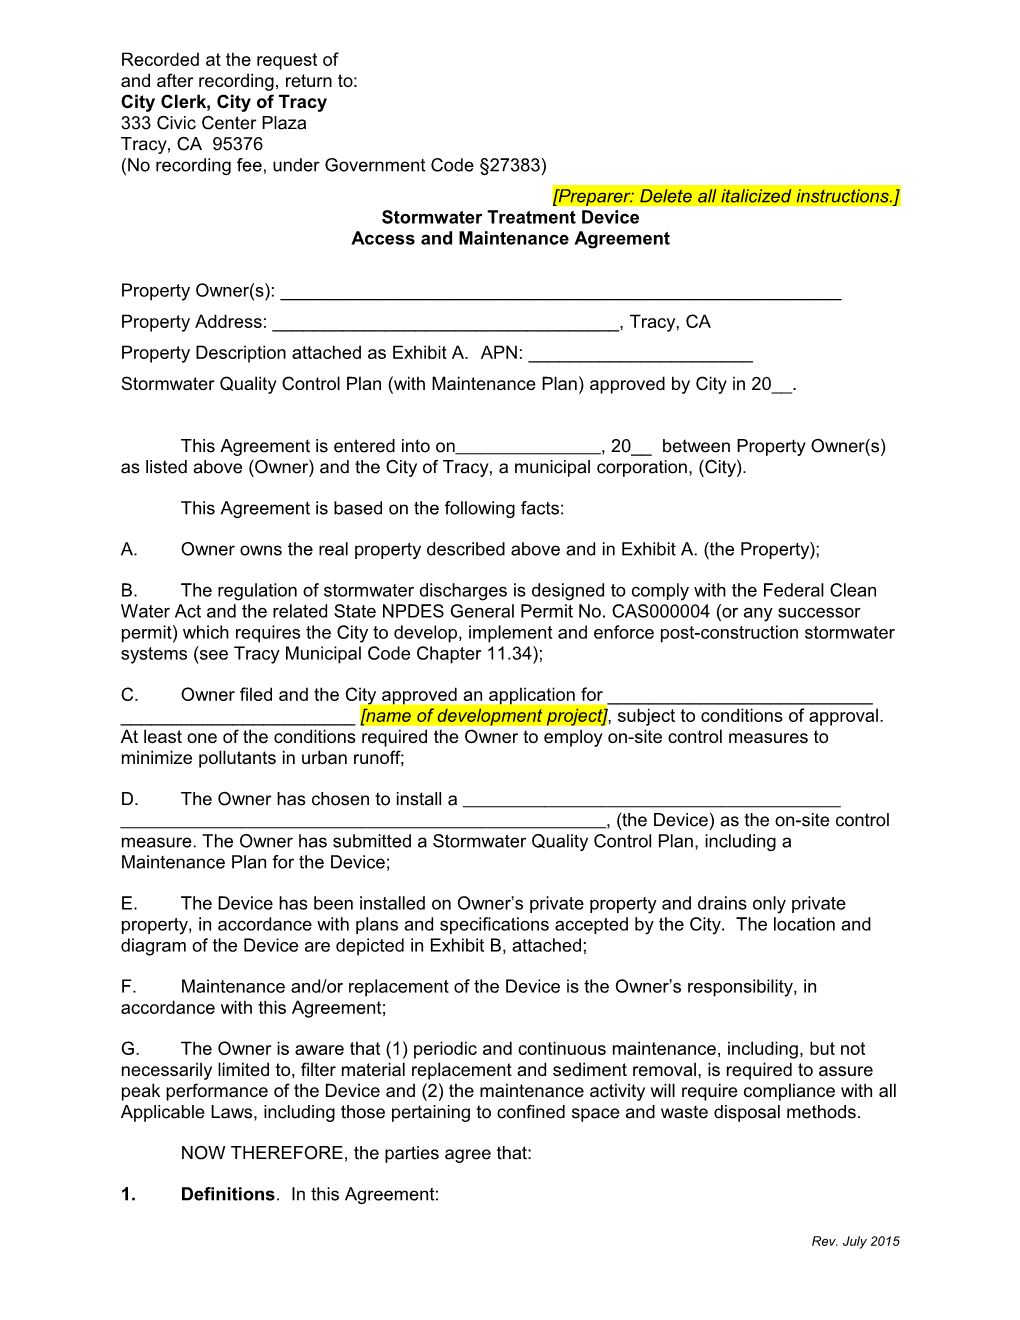 City of Tracy Stormwater Treatment Device Agreement